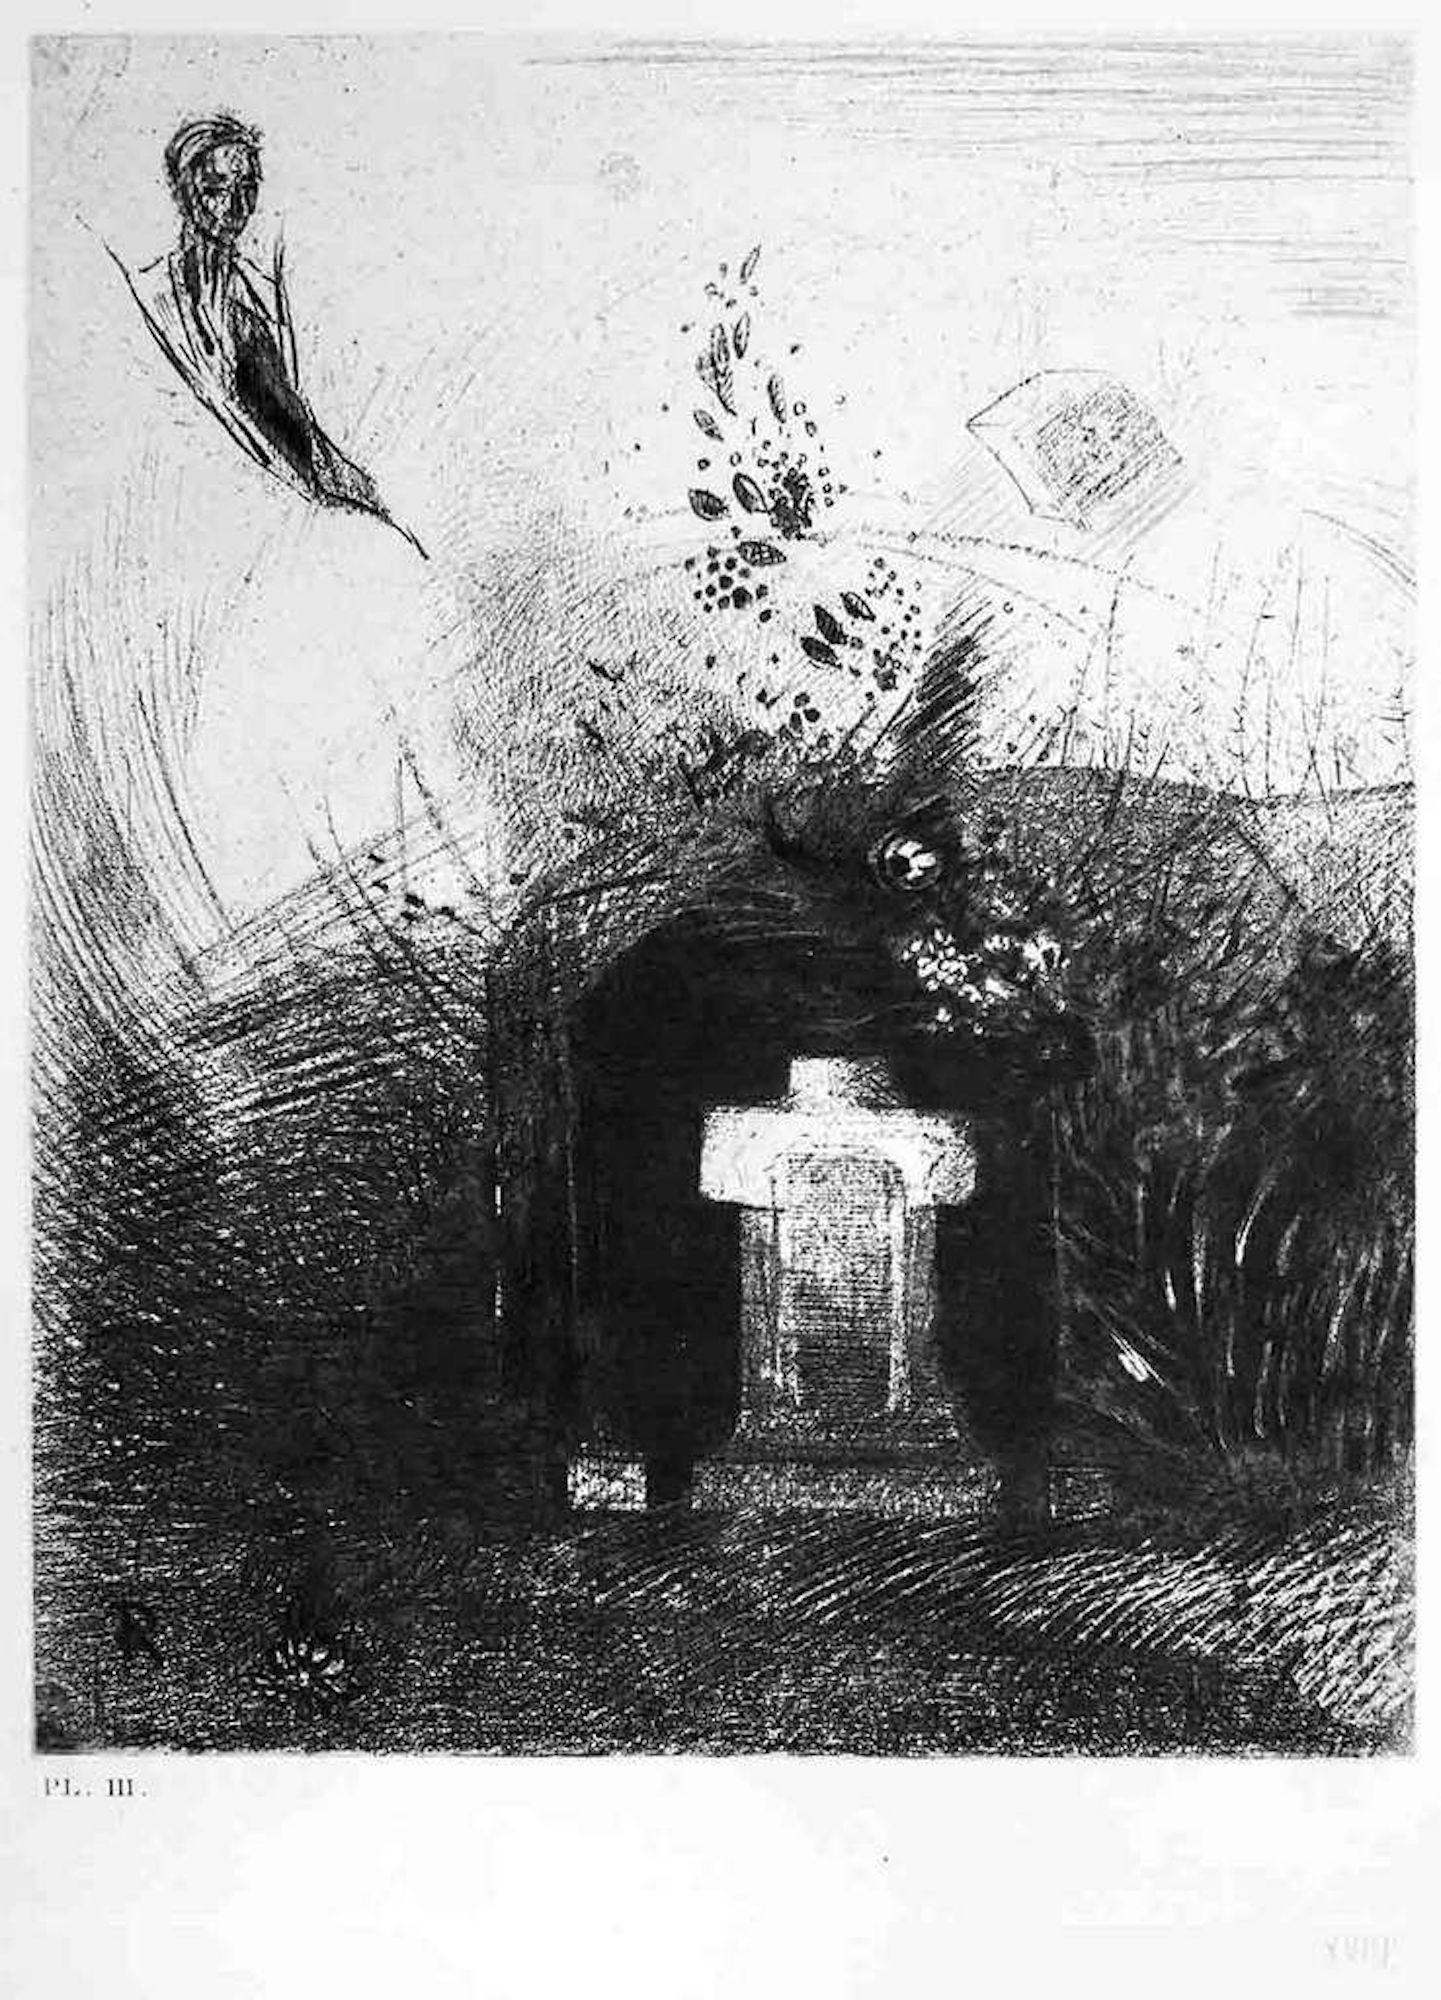 Odilon Redon Figurative Print - Illustration from the series "Les Fleurs du mal" - Etching After O. Redon